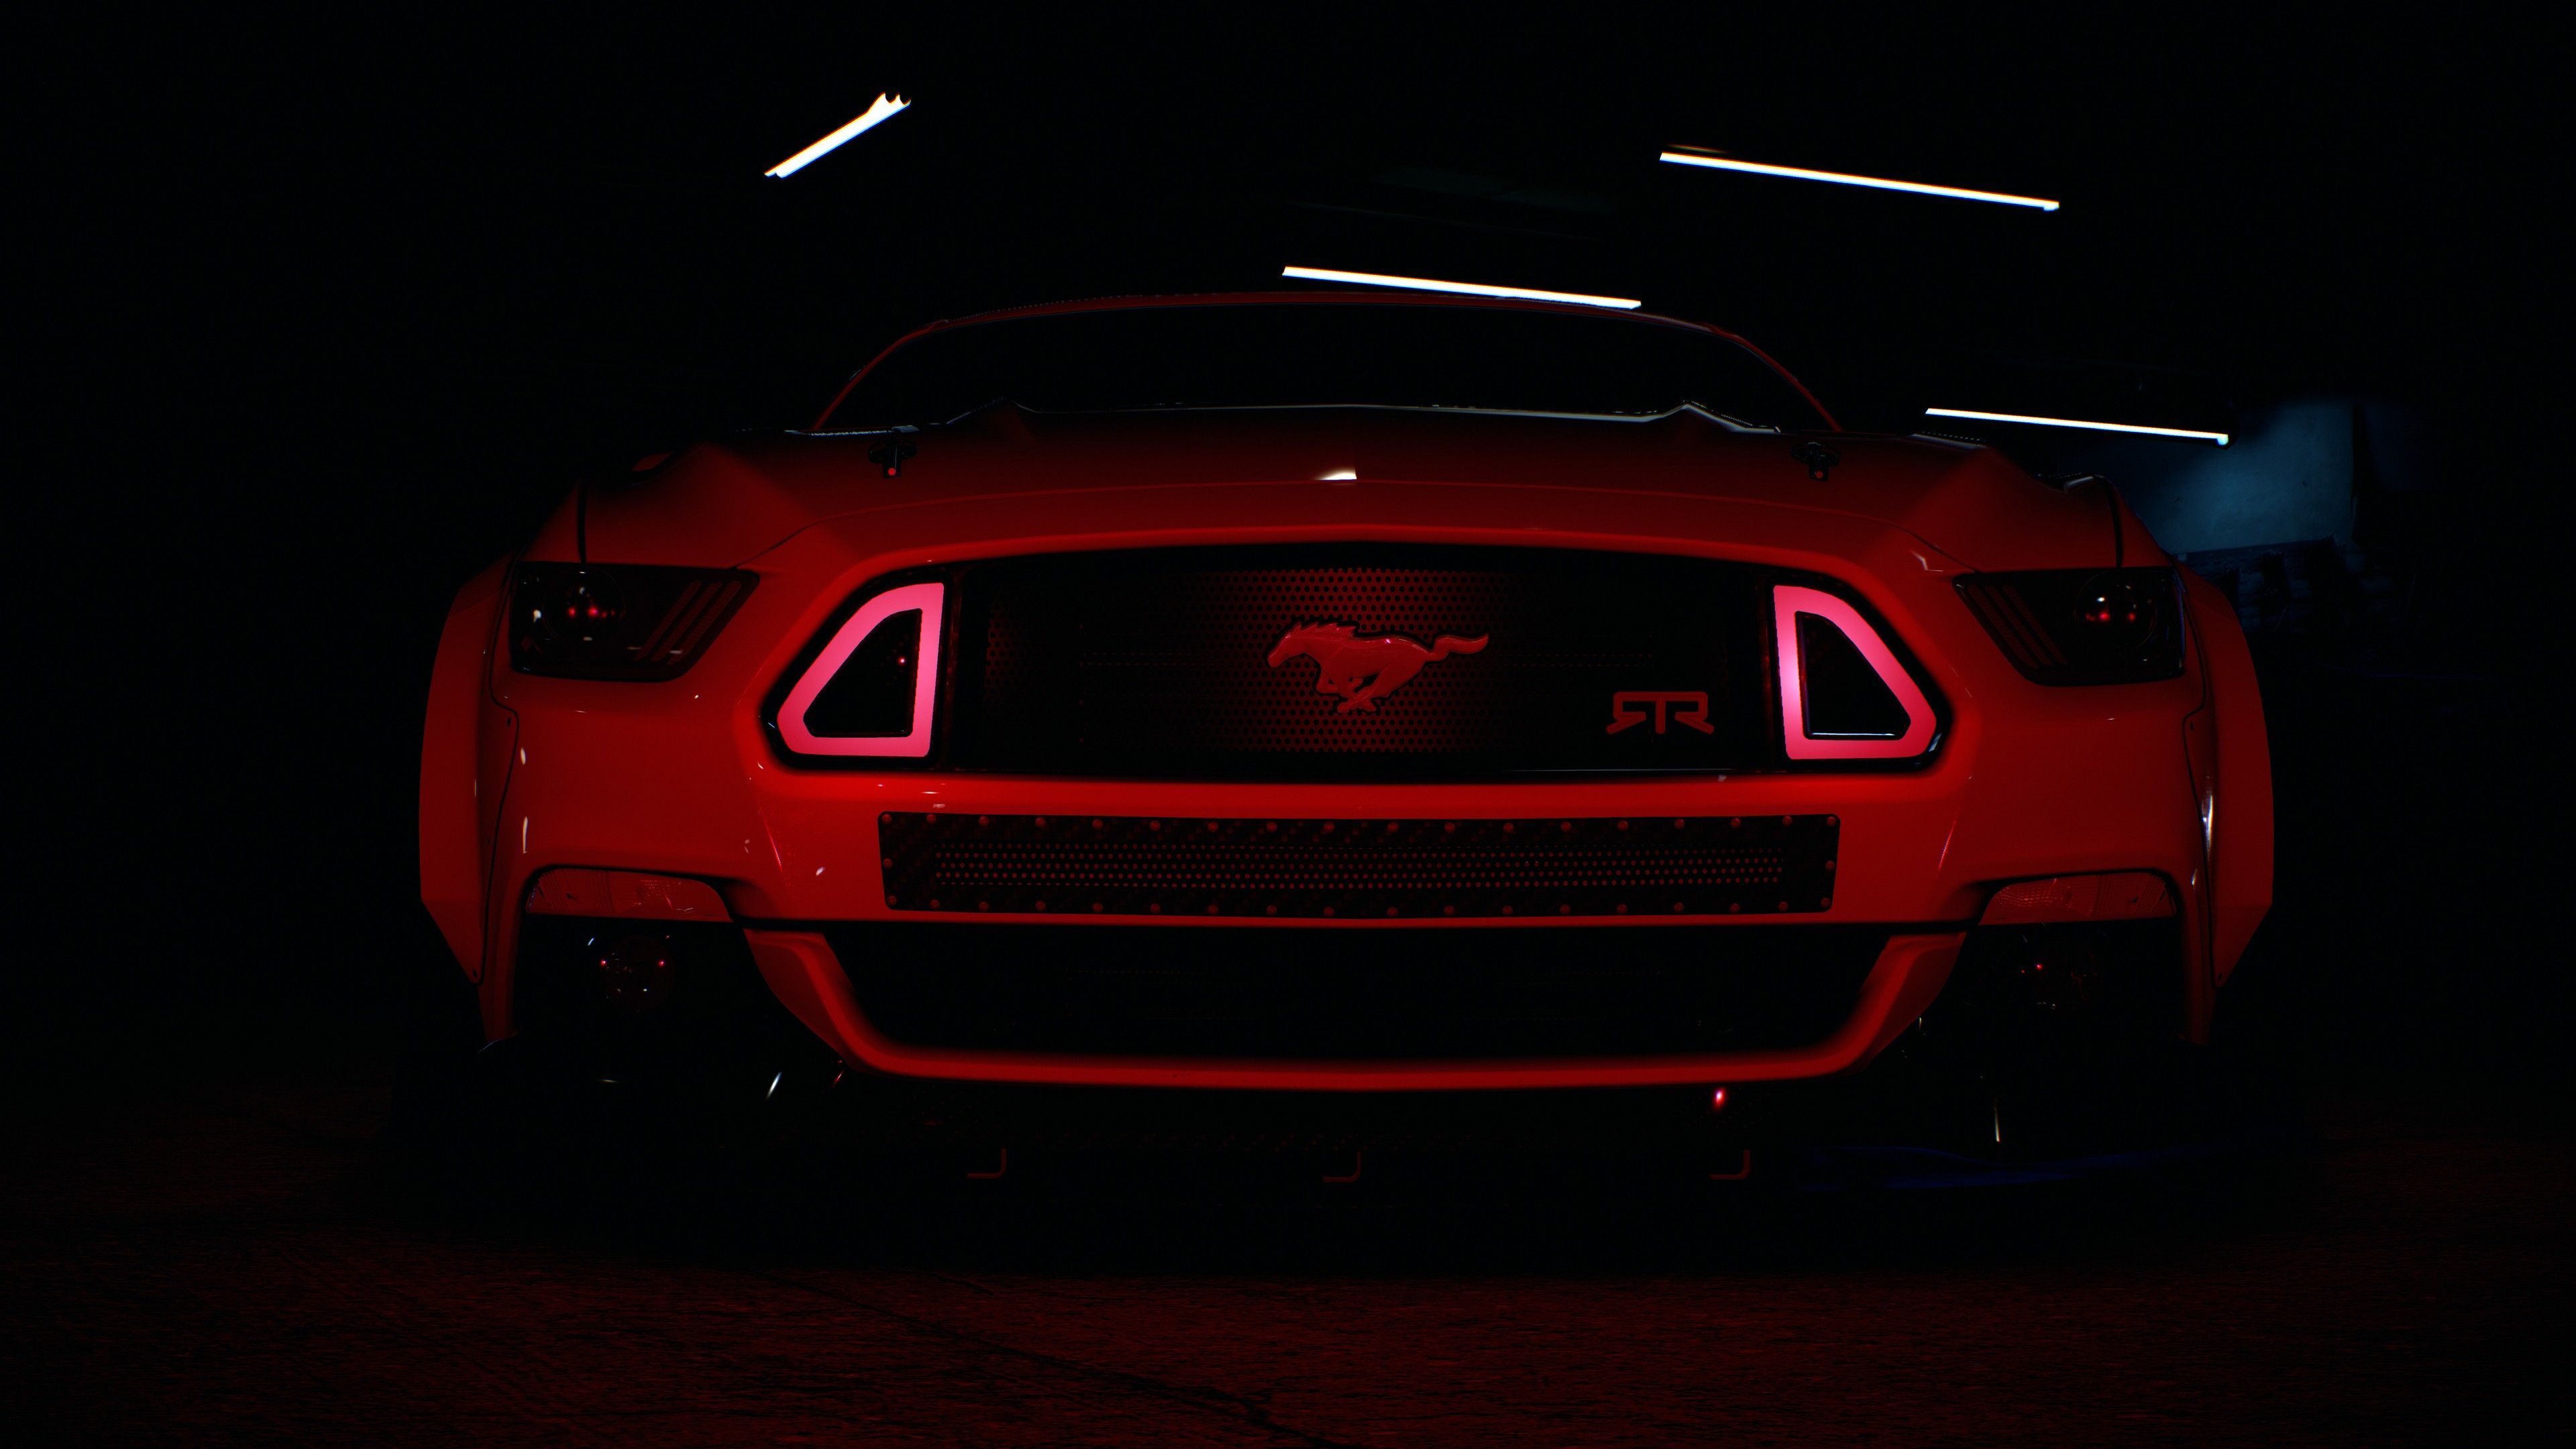 Need For Speed Ford Mustang Need For Speed Wallpaper, Hd Wallpaper, Ford Mustang Wallpaper, Cars Wallp. Mustang Wallpaper, Ford Mustang, Ford Mustang Wallpaper